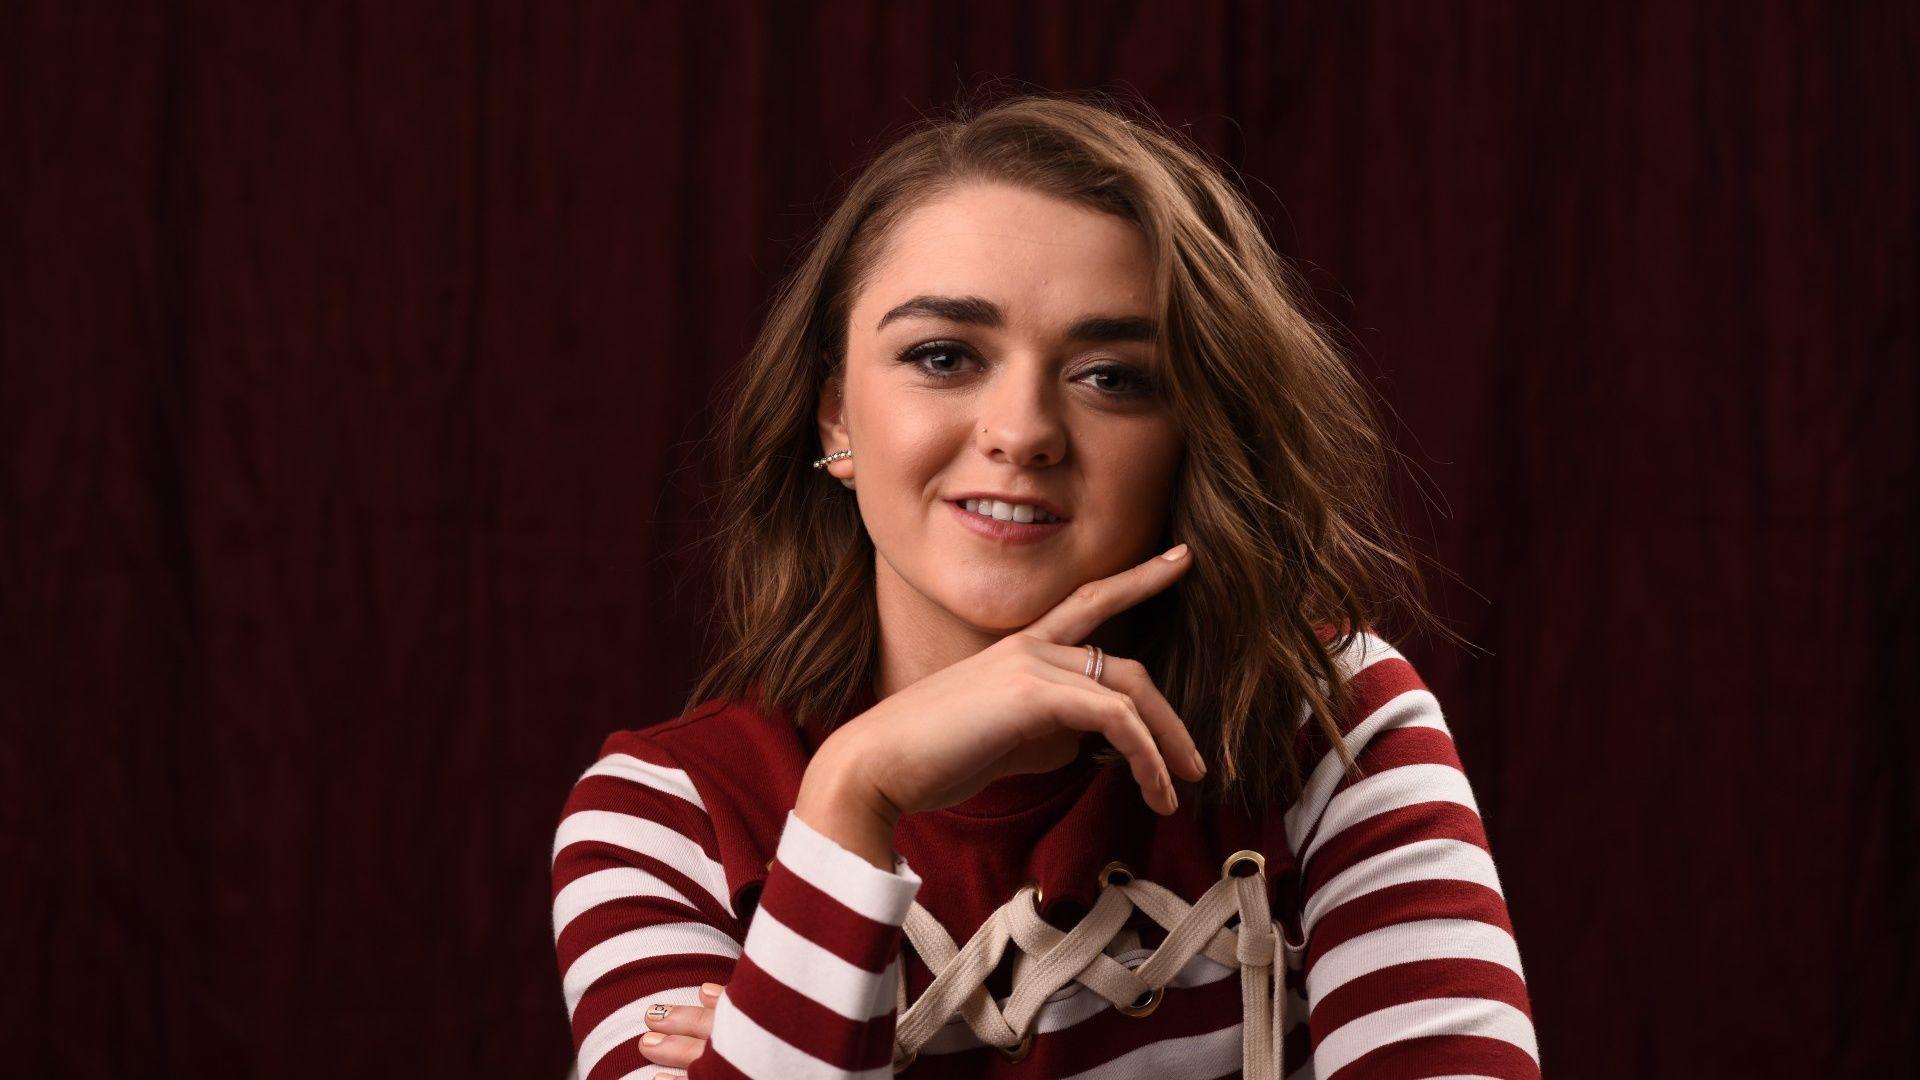 Maisie Williams Wallpaper Image Photo Picture Background